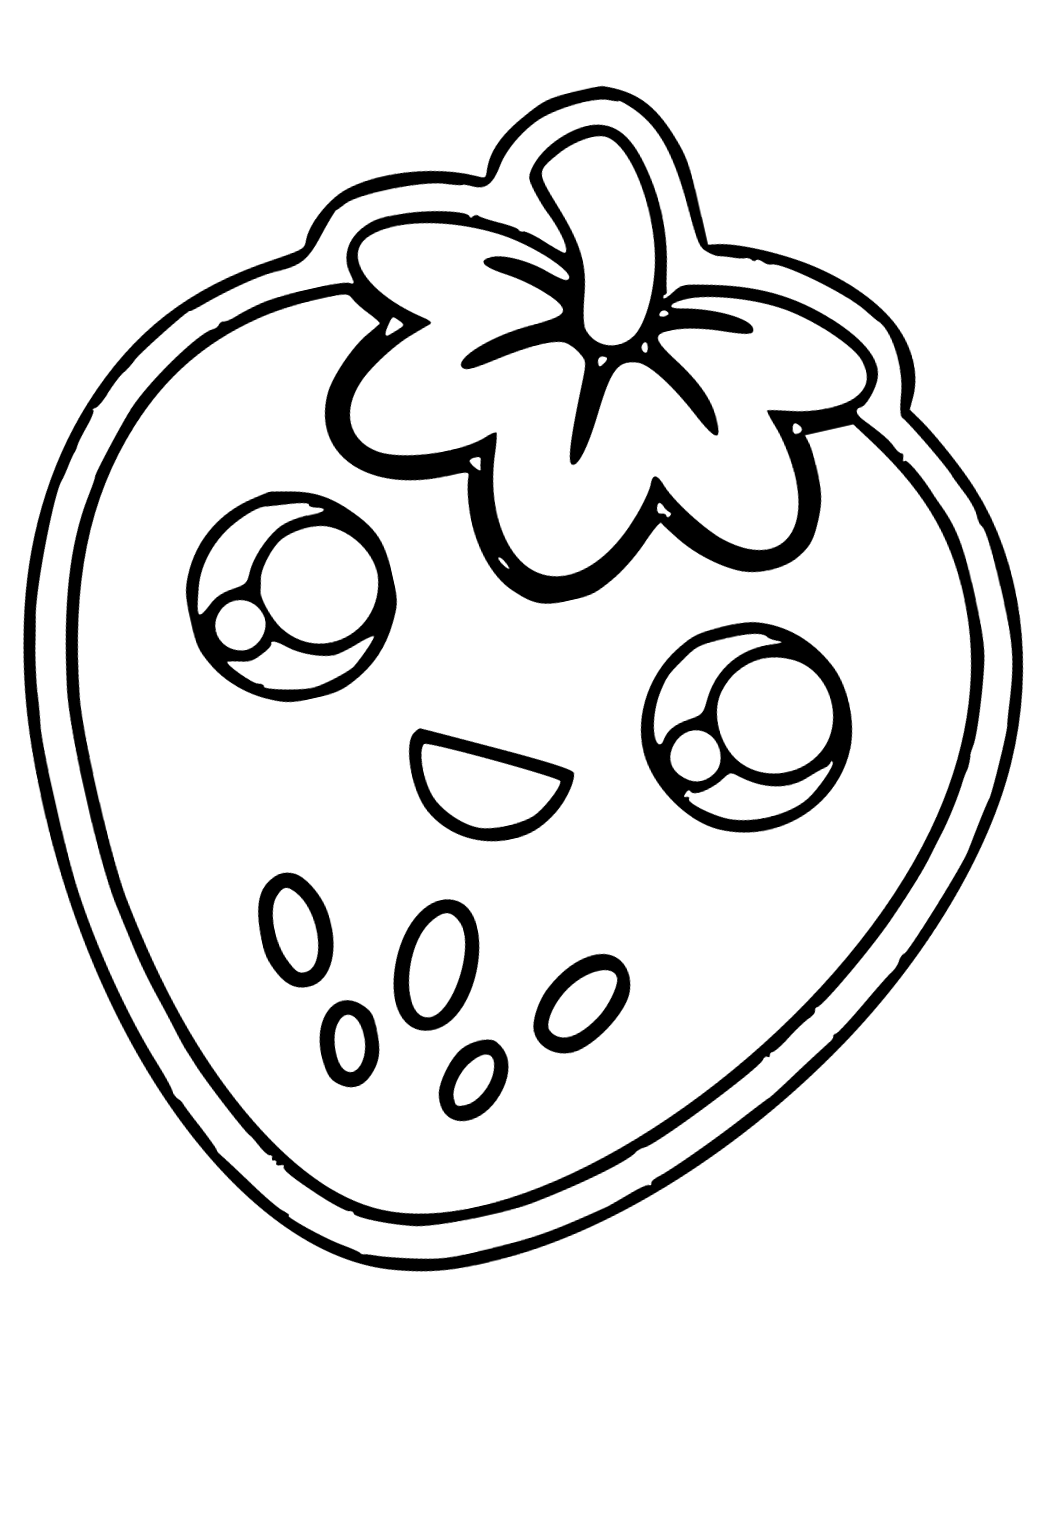 Free printable cute kawaii strawberry coloring page sheet and picture for adults and kids girls and boys